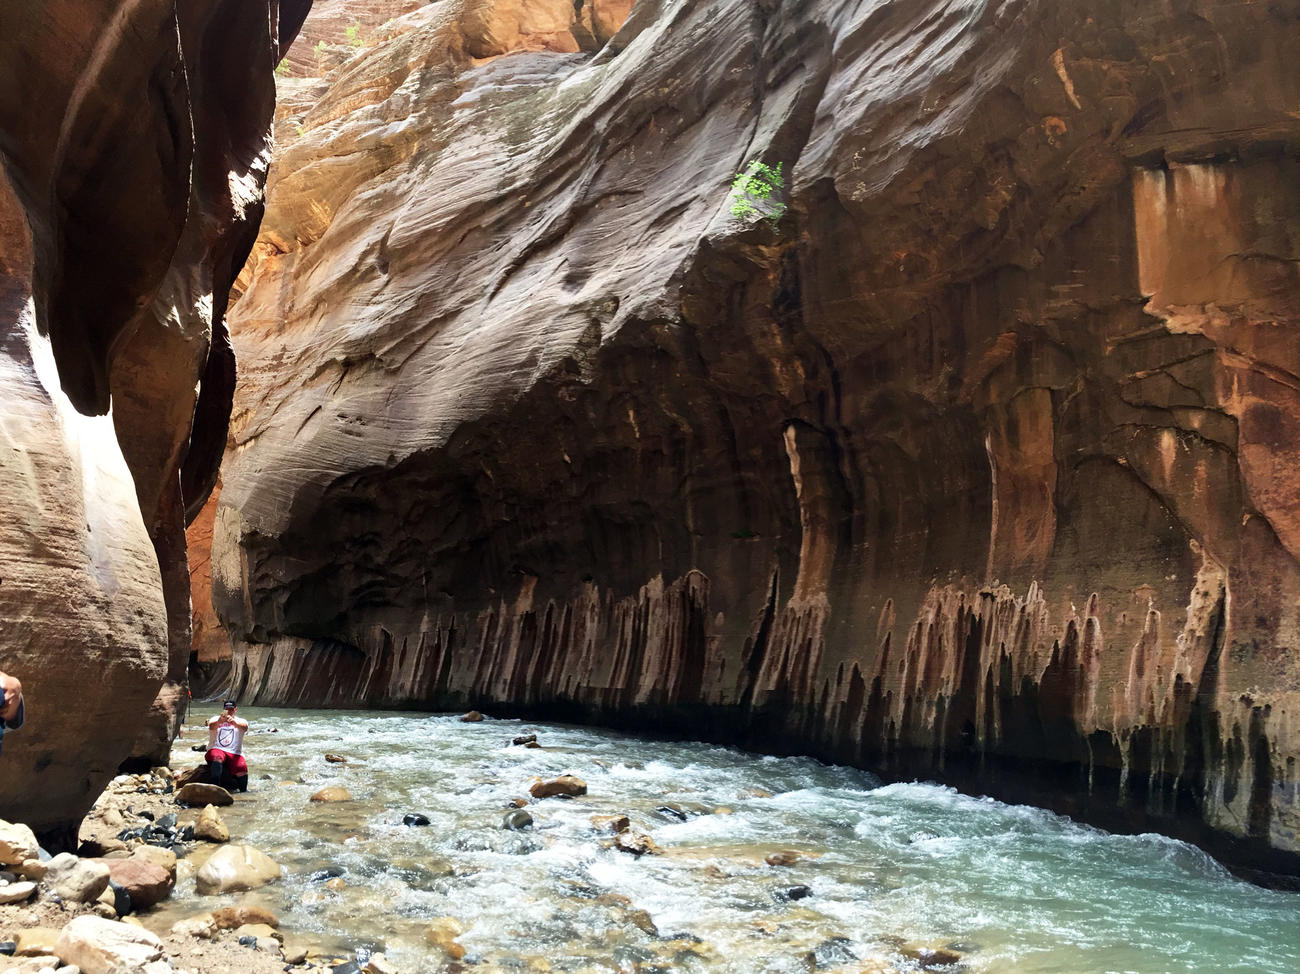 How to Prepare for a Hiking Trip to Zion’s Narrows